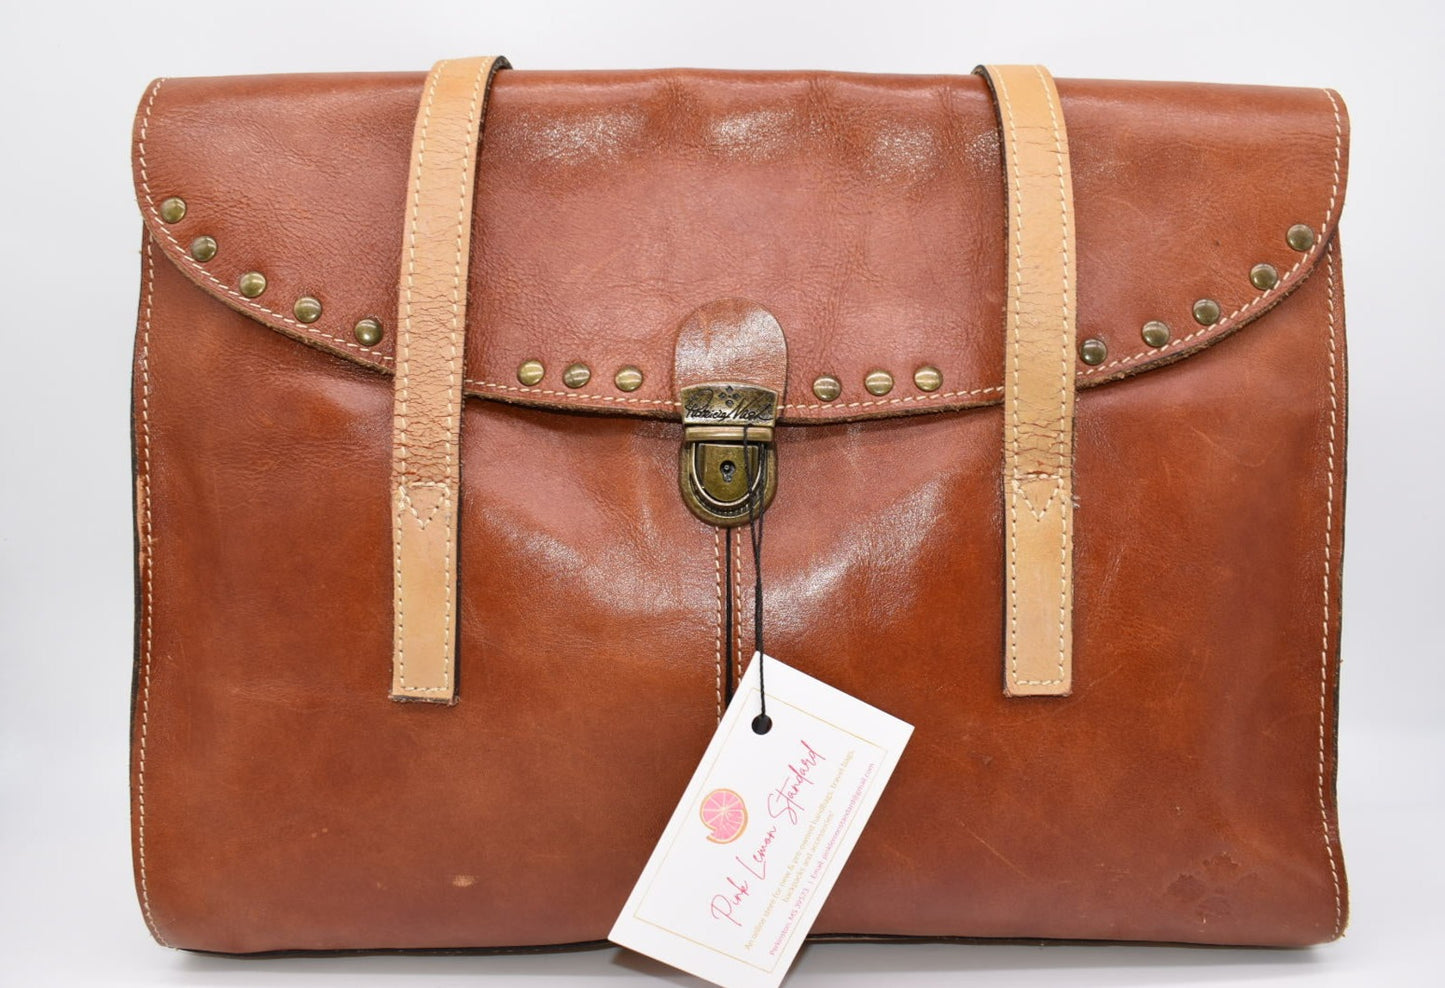 Patricia Nash Cantabria Smooth Leather Flap Satchel